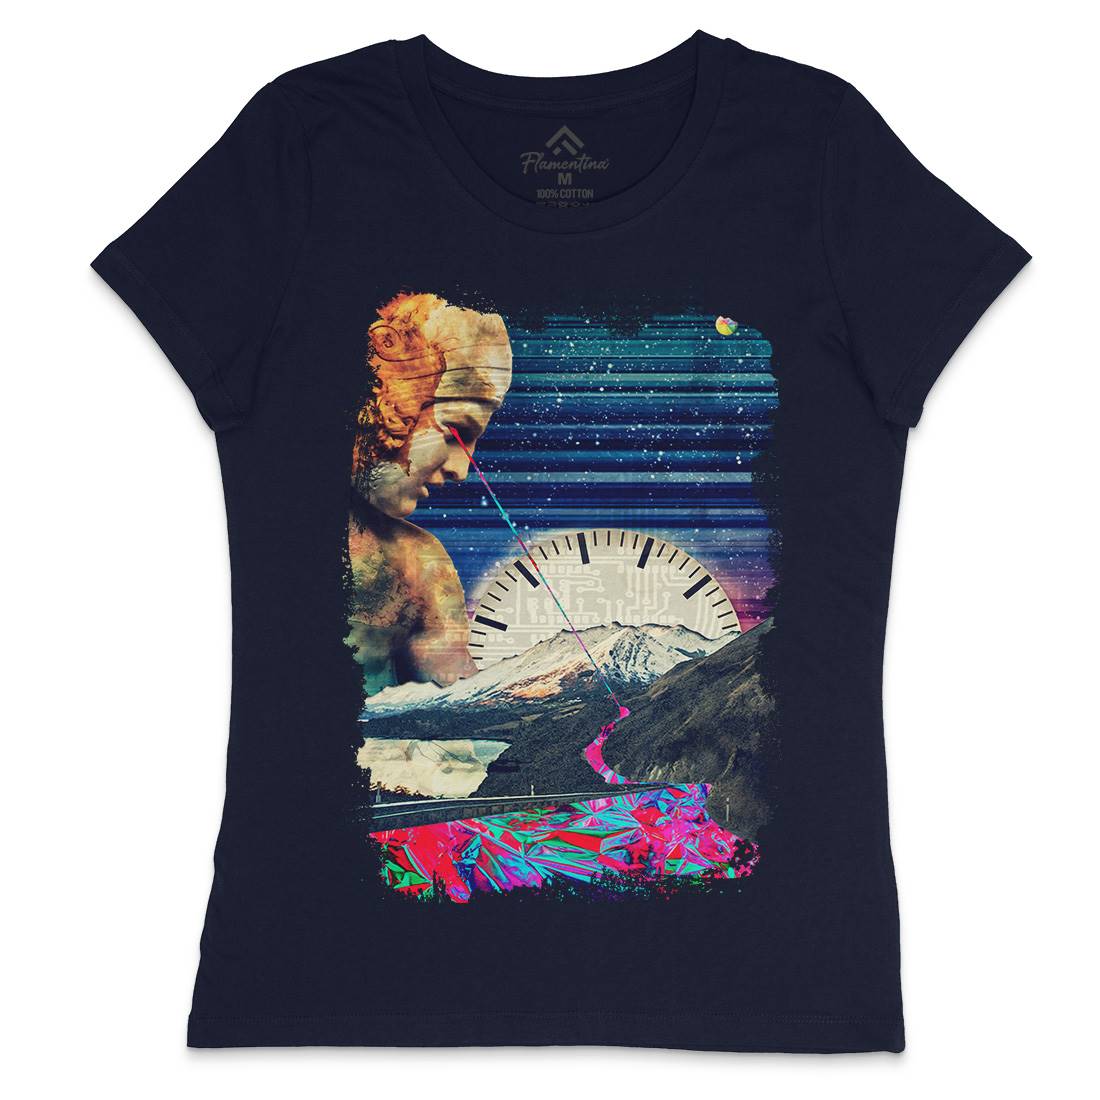 Nephilim Womens Crew Neck T-Shirt Space A886